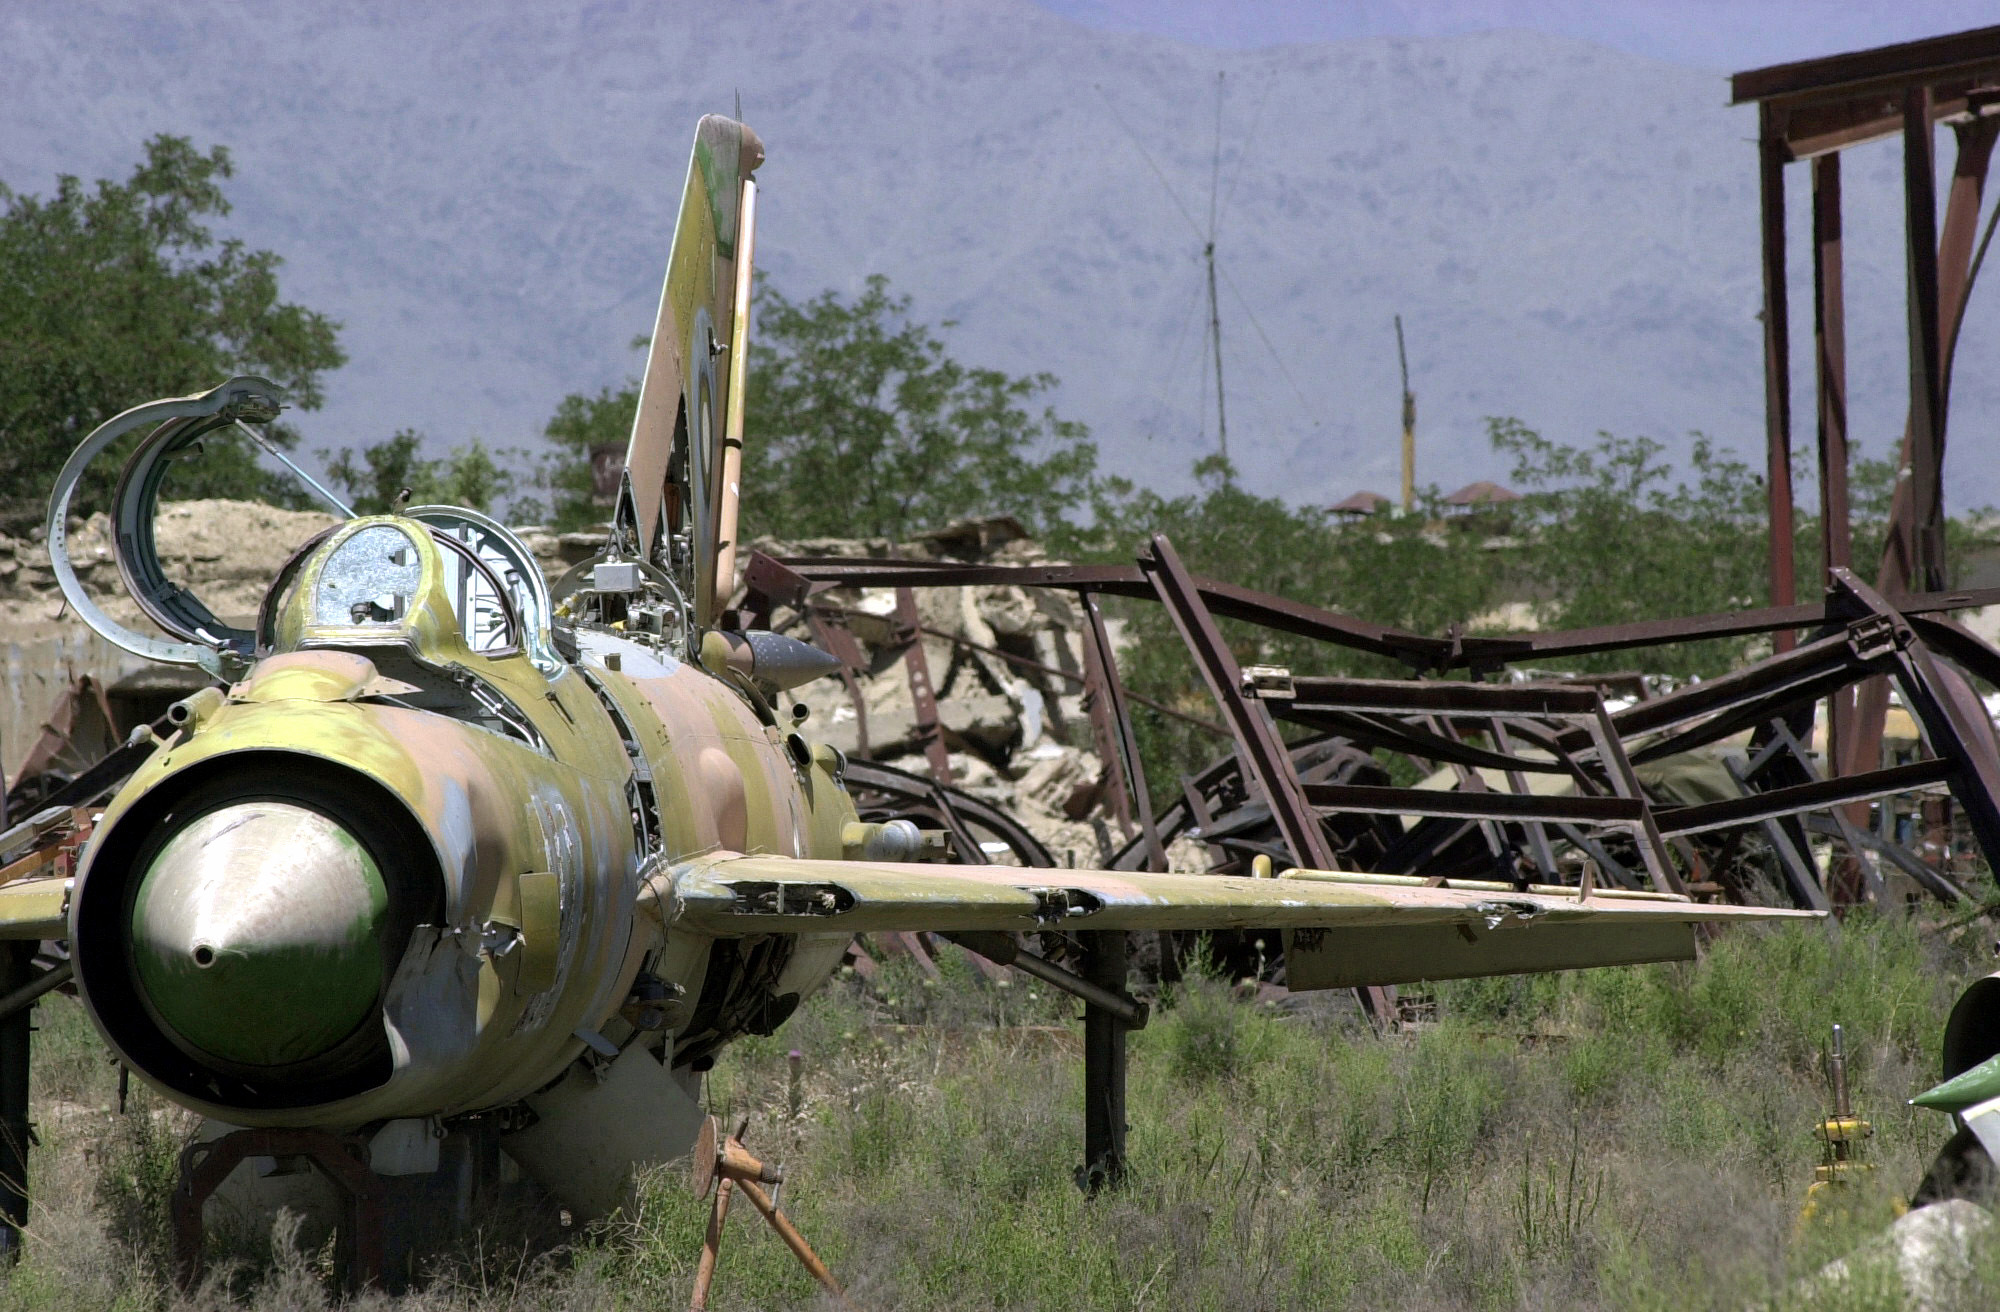 The_wreckage_of_an_abandoned_Soviet_Mig-21_Fishbed_aircraft_sits_with_rusted_hardware_in_an_open_field_near_Bagram_Air_Base,_Afghanistan.JPEG